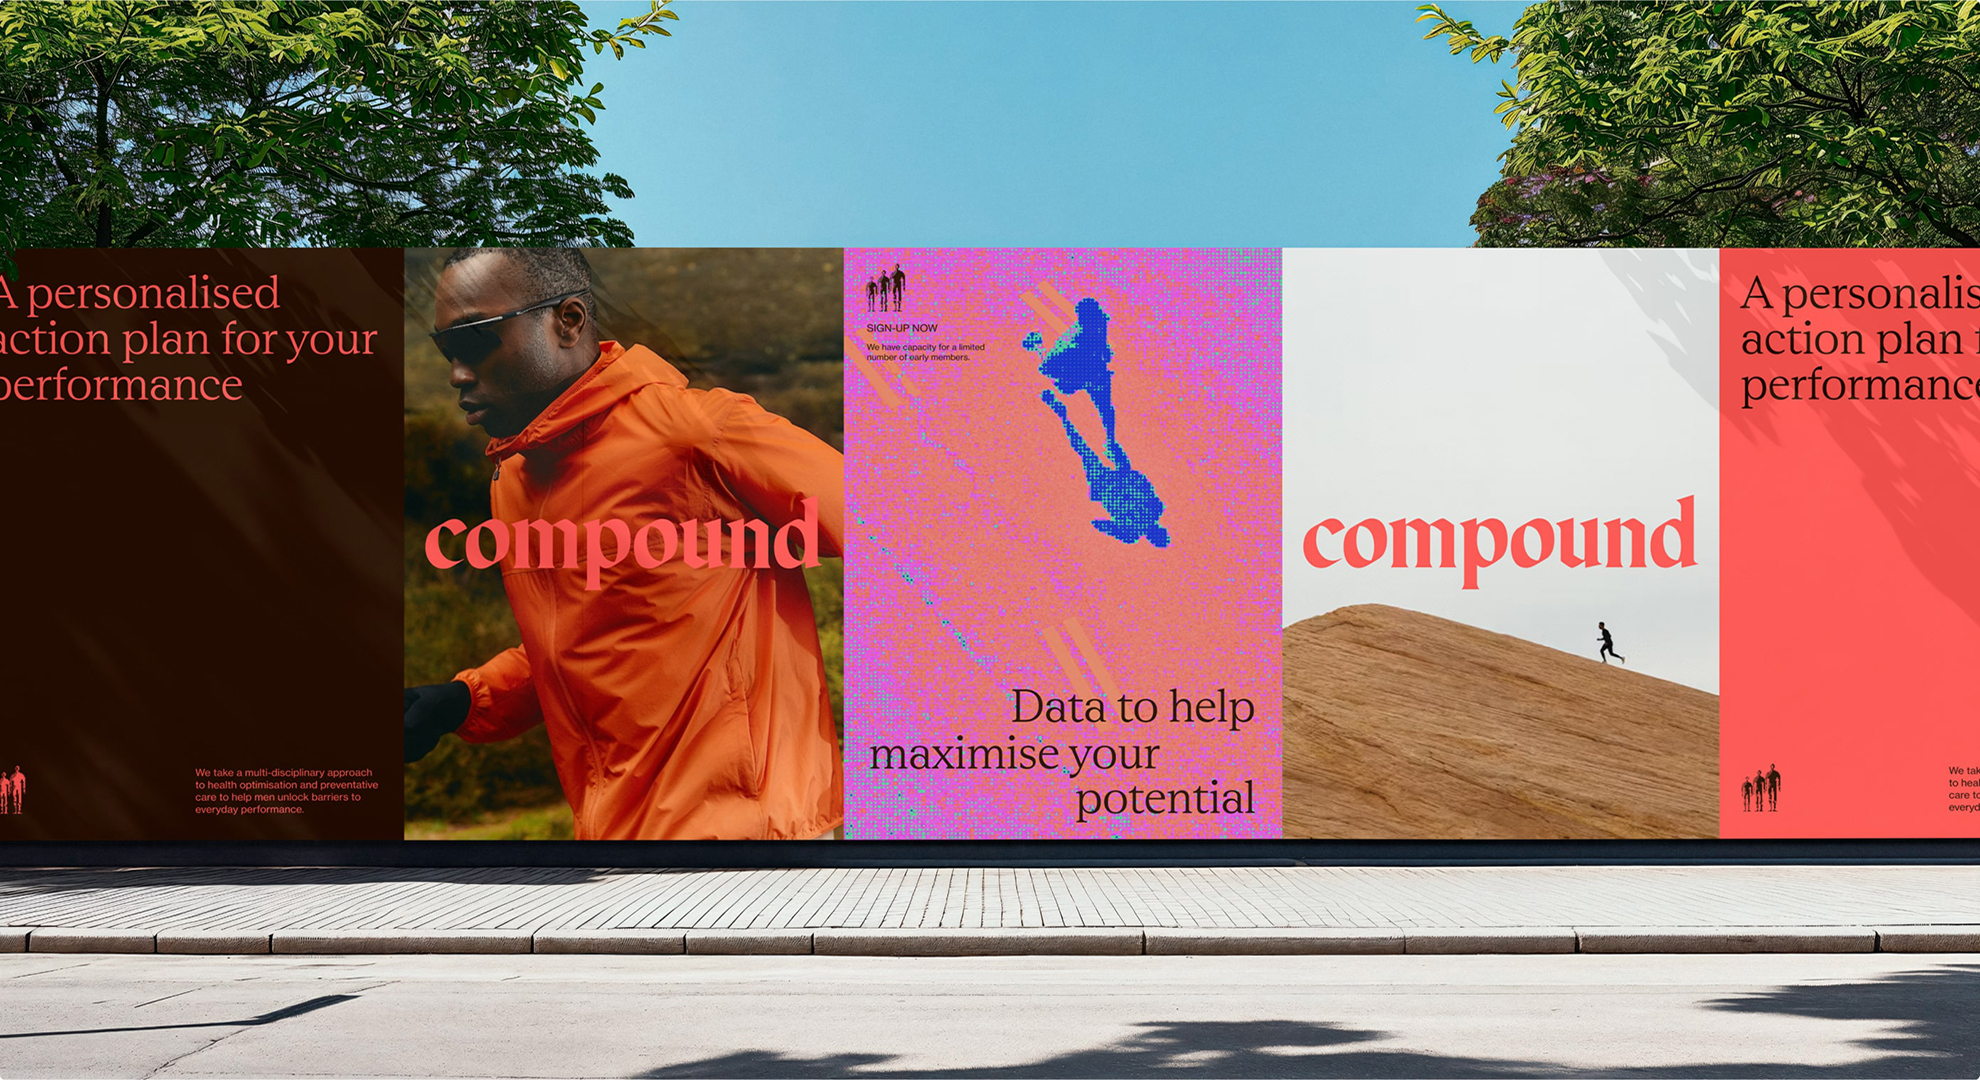 An outdoor advertisement features a series of posters. From left to right: a man running in an orange jacket, a slogan "A personalised action plan for your performance," a pixelated athletic figure with "Data to help maximise your potential," and a lone runner on a hill.